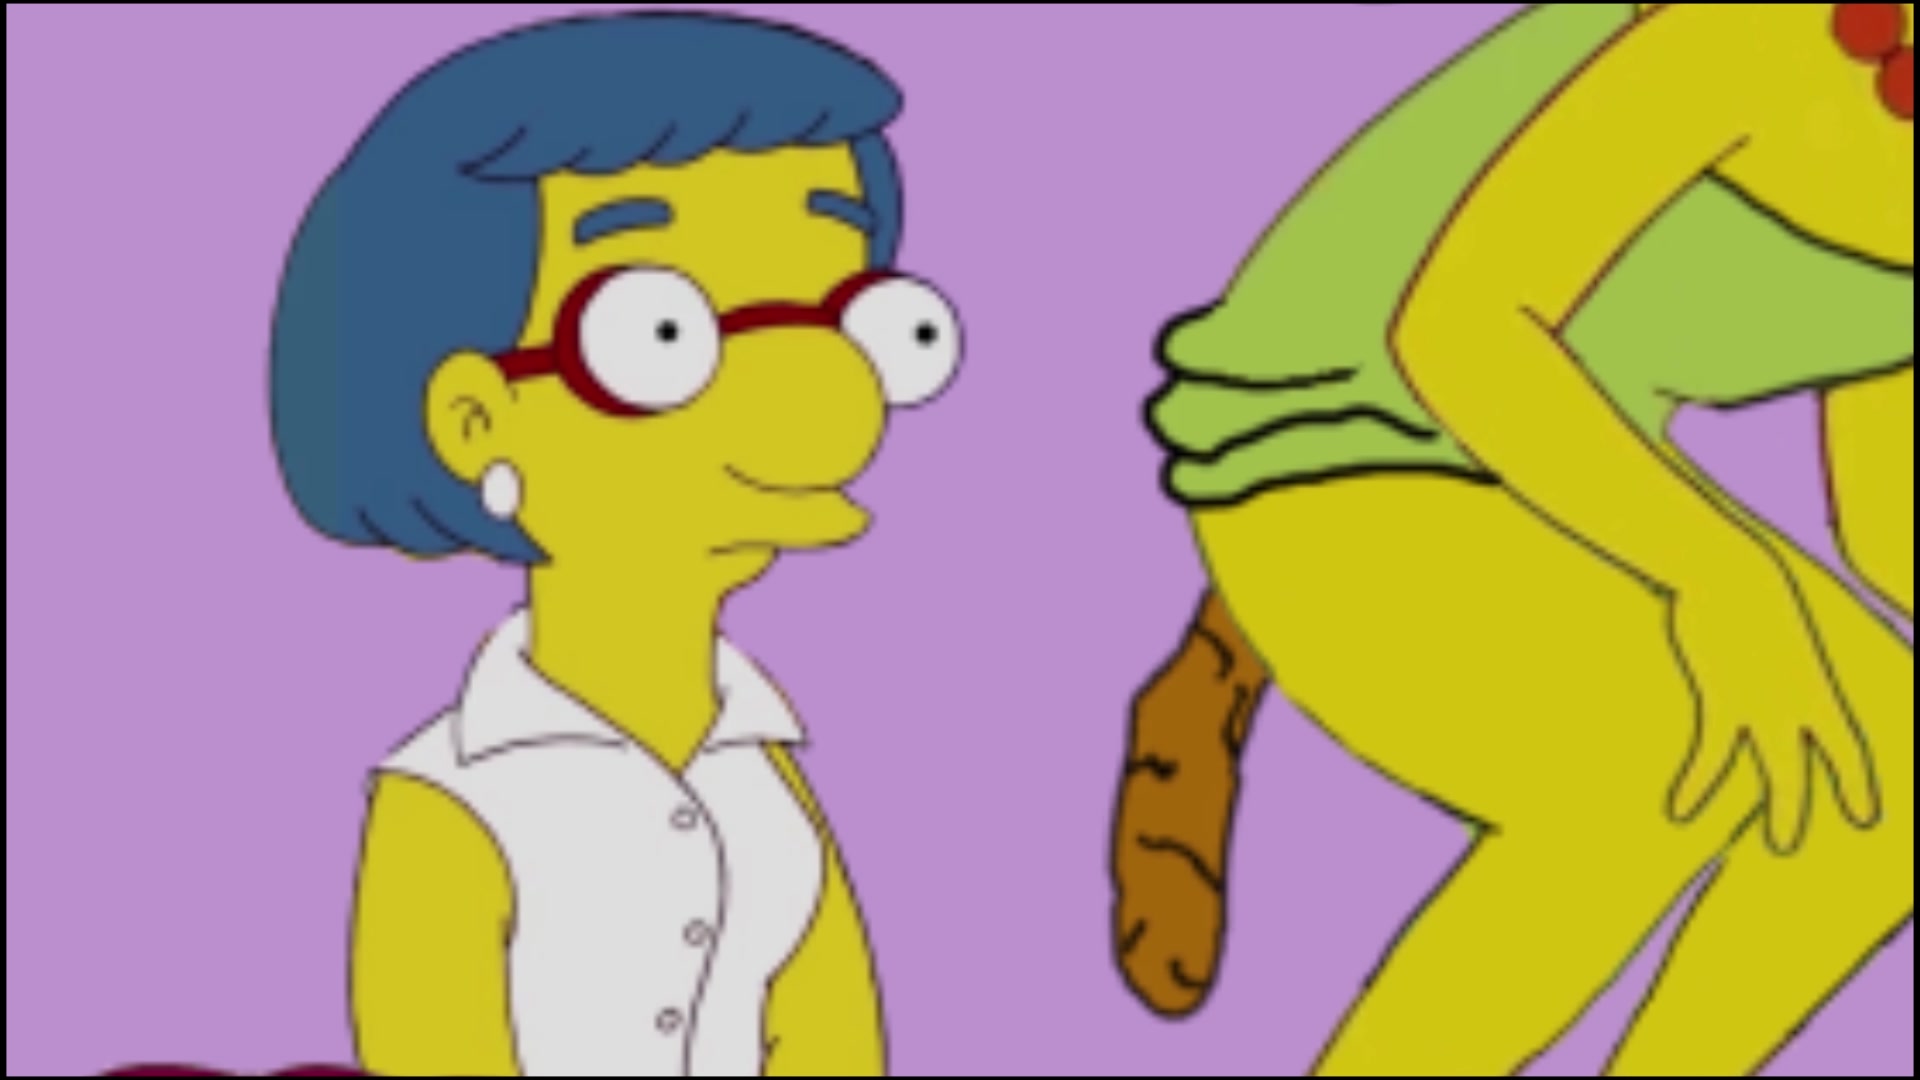 Simpsons Scat Porn - Cartoon Scat - Episode 02 : Marge et Luann - ScatFap.com - scat porn search  - FREE videos of extreme kaviar and copro sex, dirty shit eating and  smearing